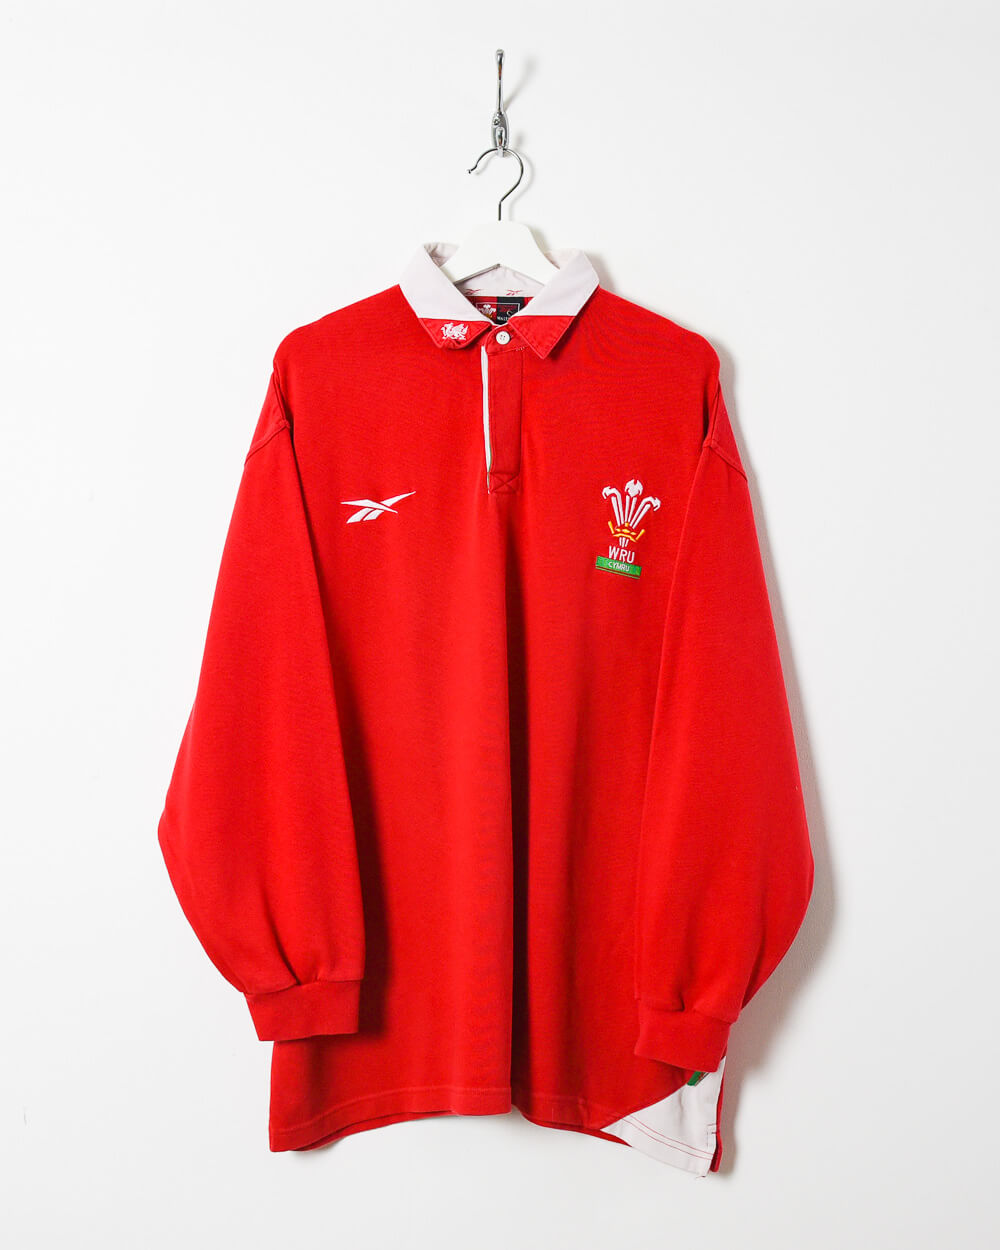 Red Reebok Wales Rugby Shirt - XX-Large